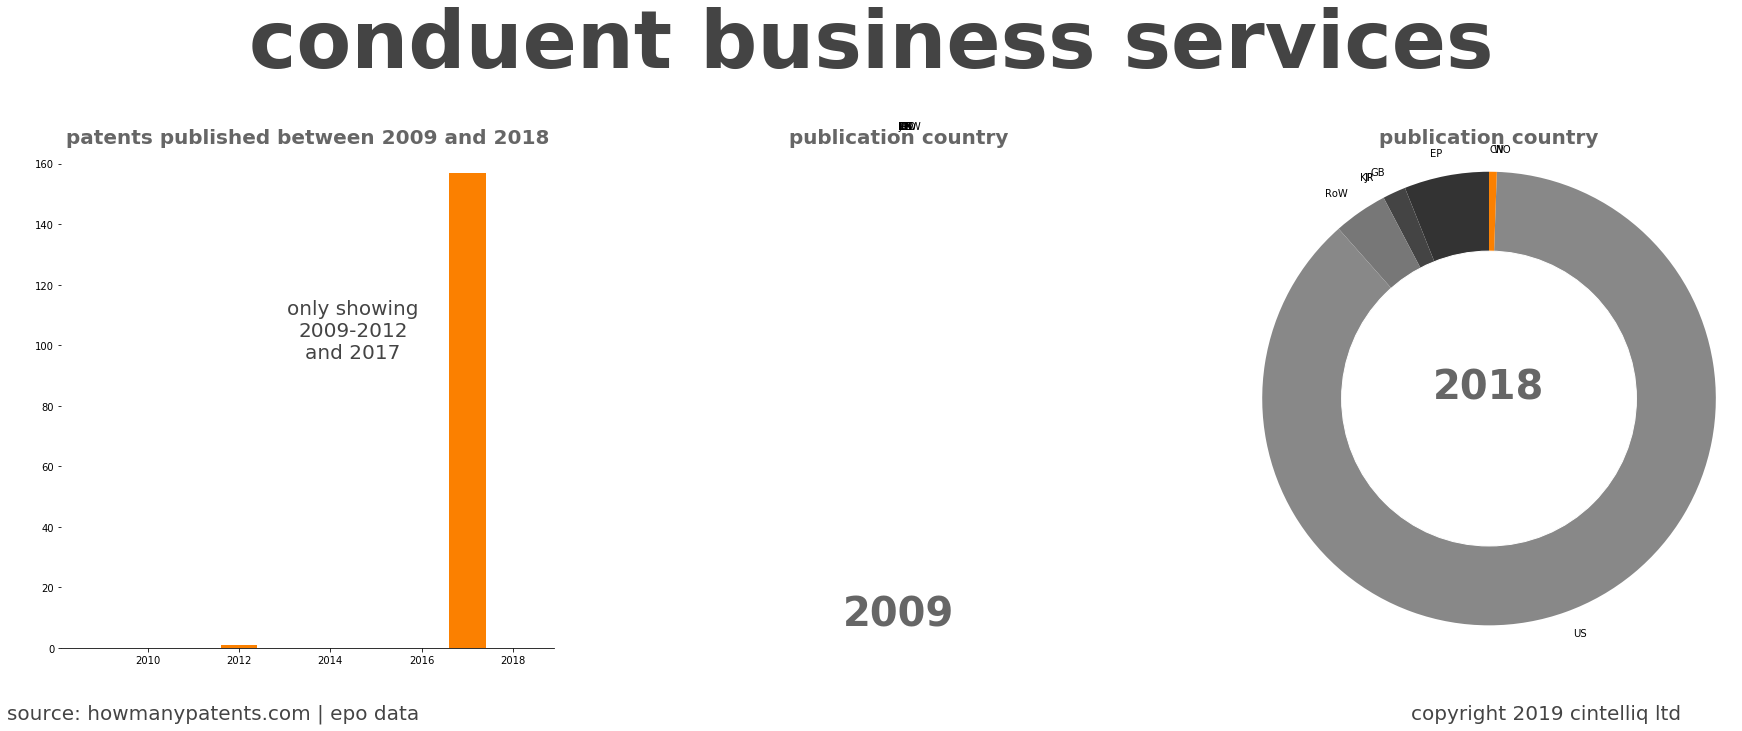 summary of patents for Conduent Business Services